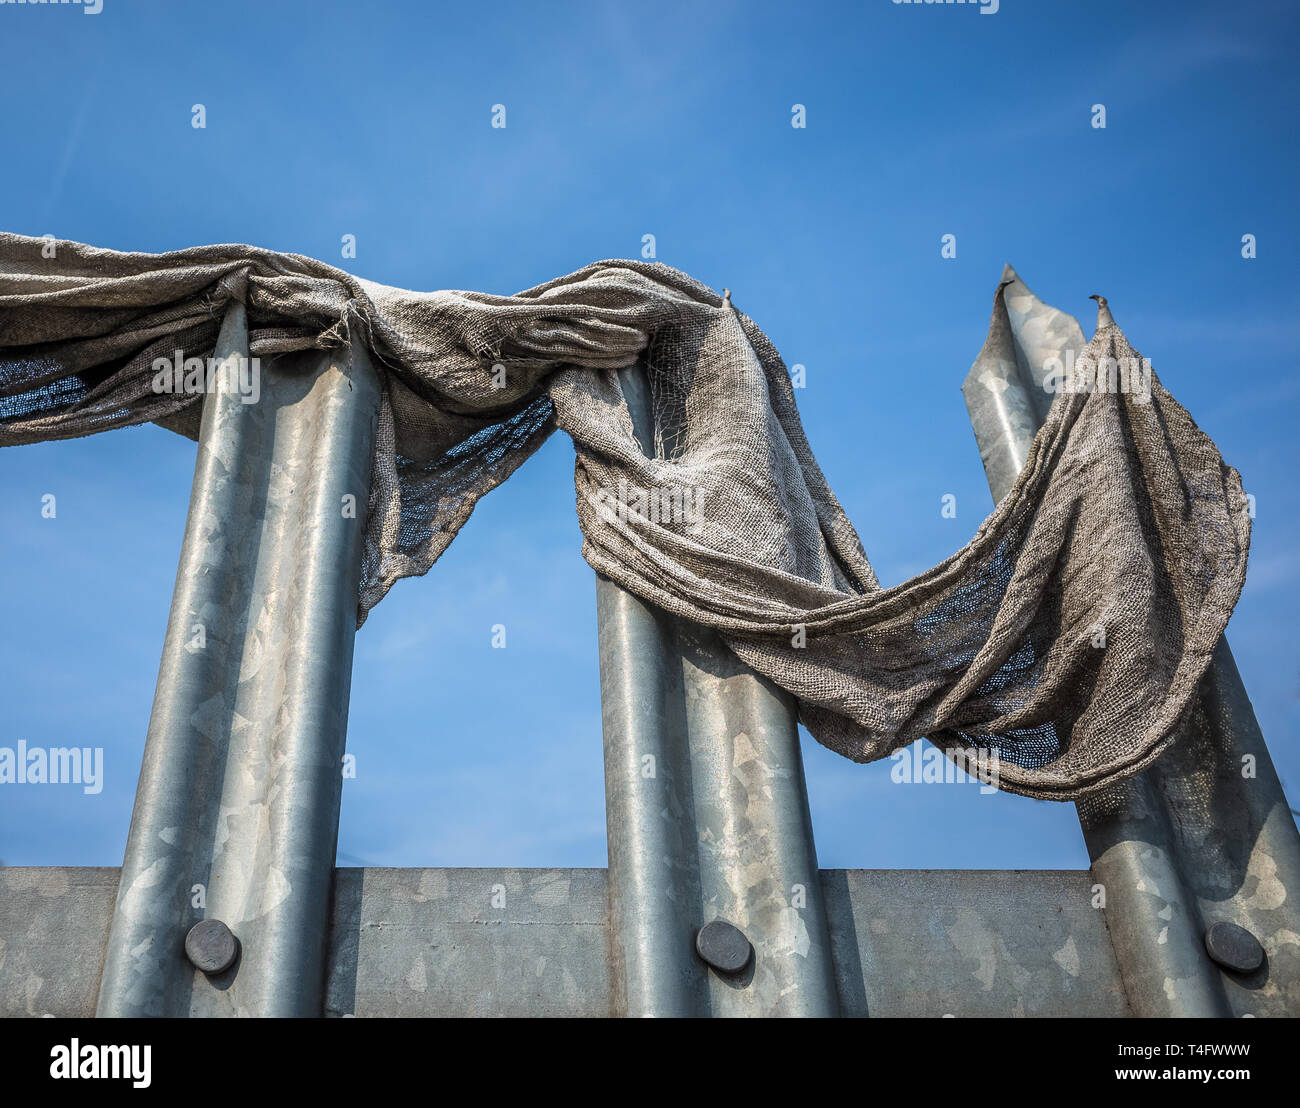 Old fabric cloth caught on metal spiked security barrier. Stock Photo